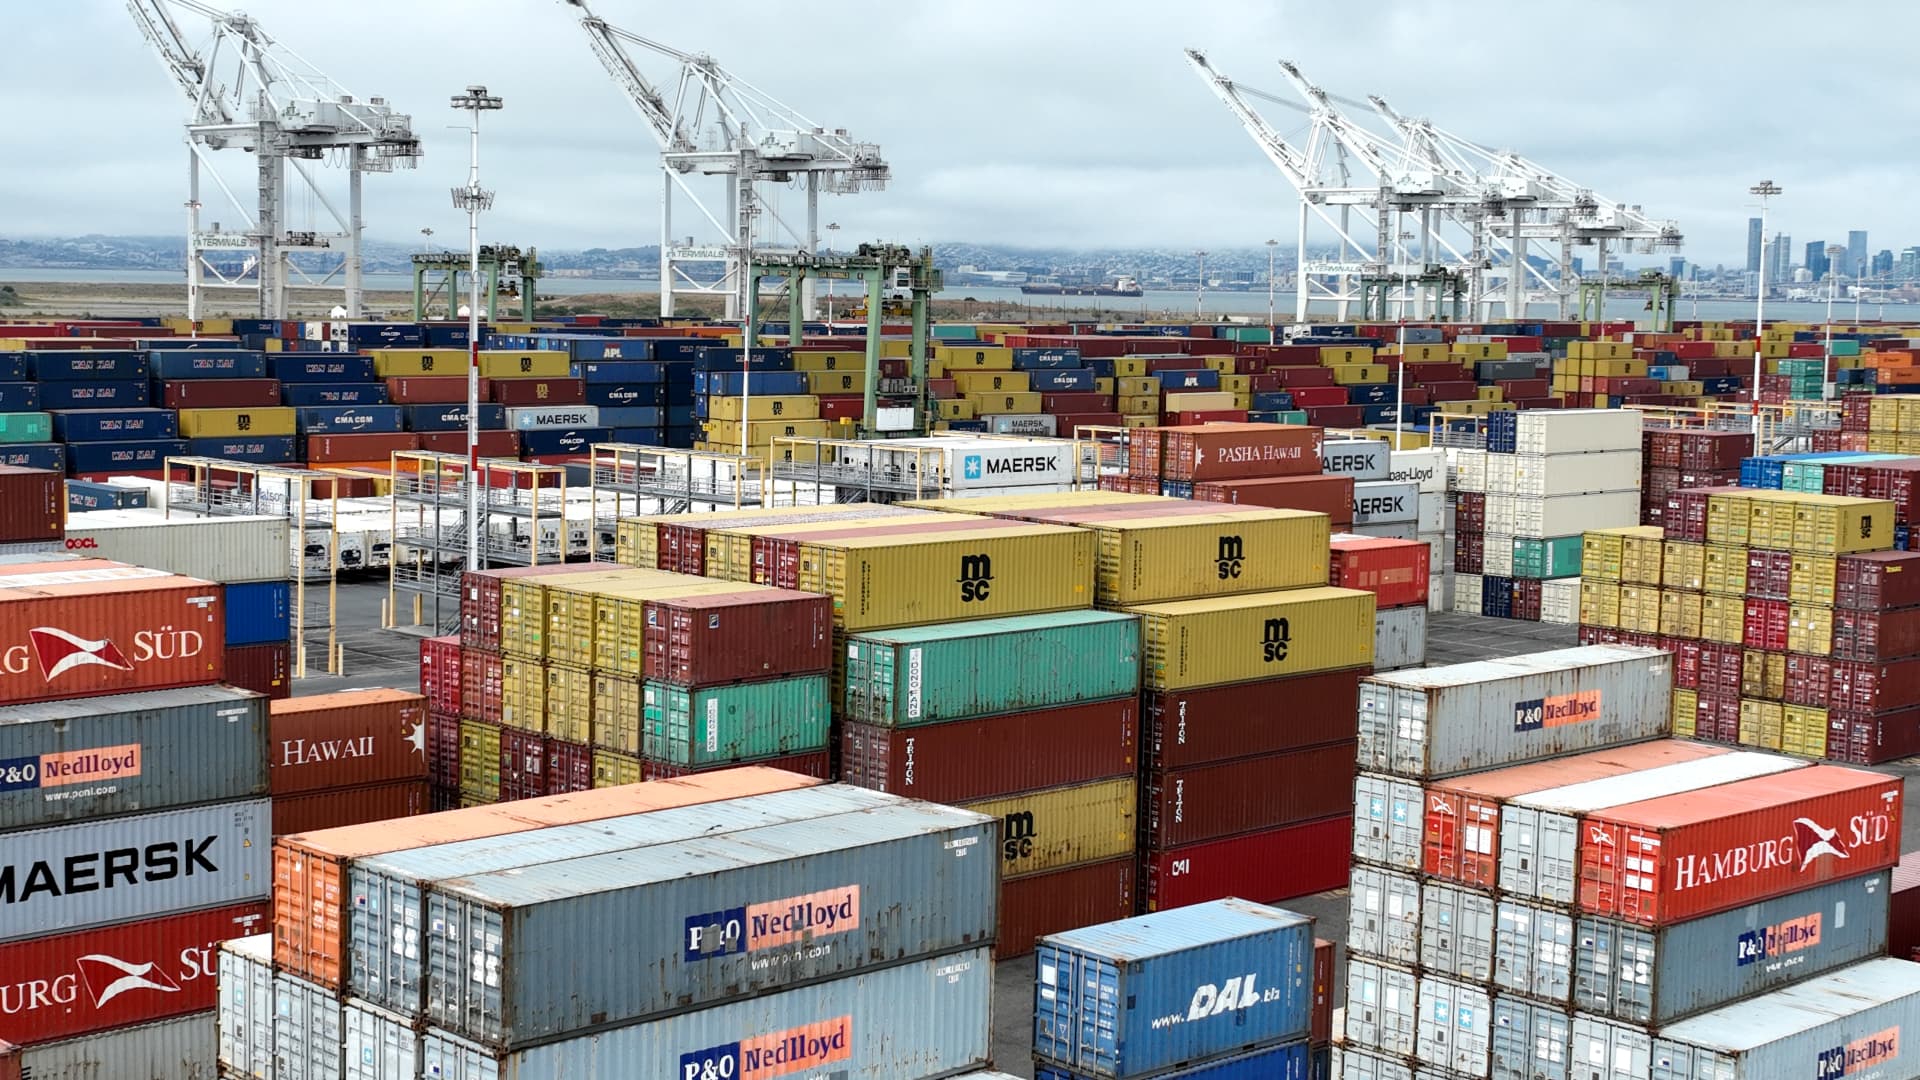 West Coast ports reduce idling vessels as container supply increases